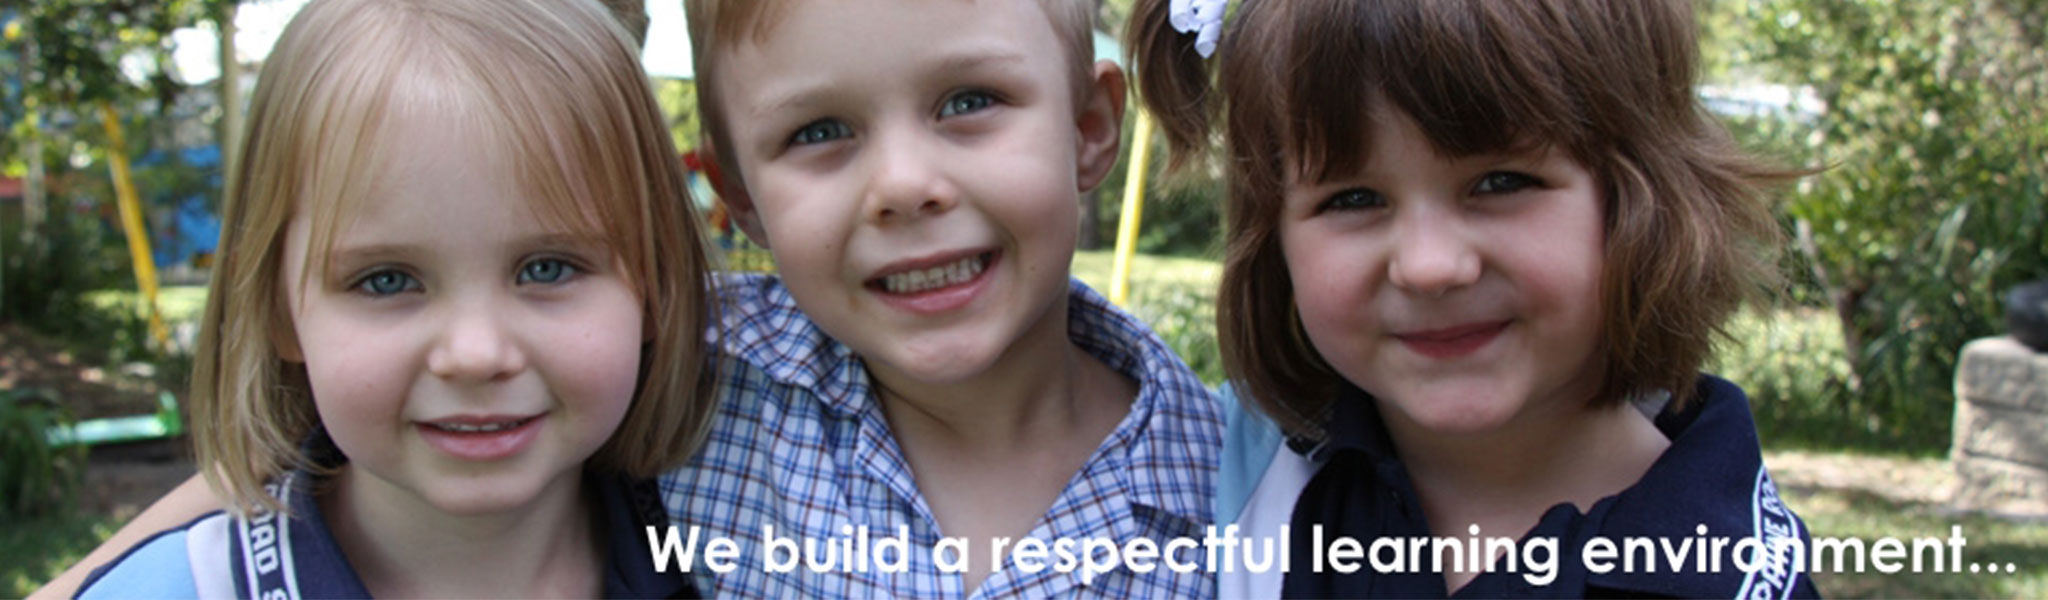 We build a respectful learning environment...